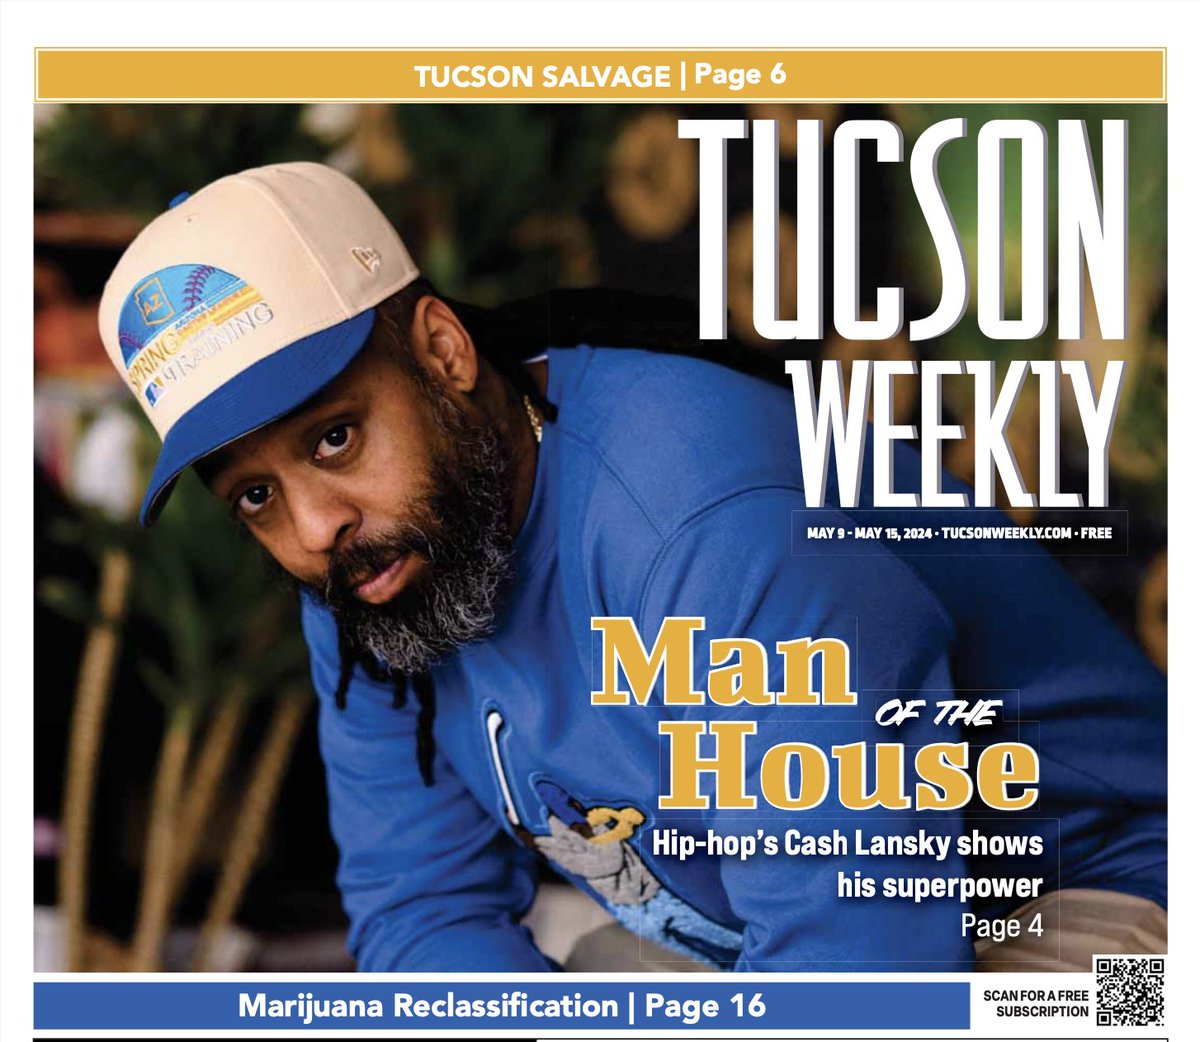 Tucson's @Cashlansky lands the cover story for his hometown paper @tucsonweekly 

Read Here: tinyurl.com/cashtucwkly